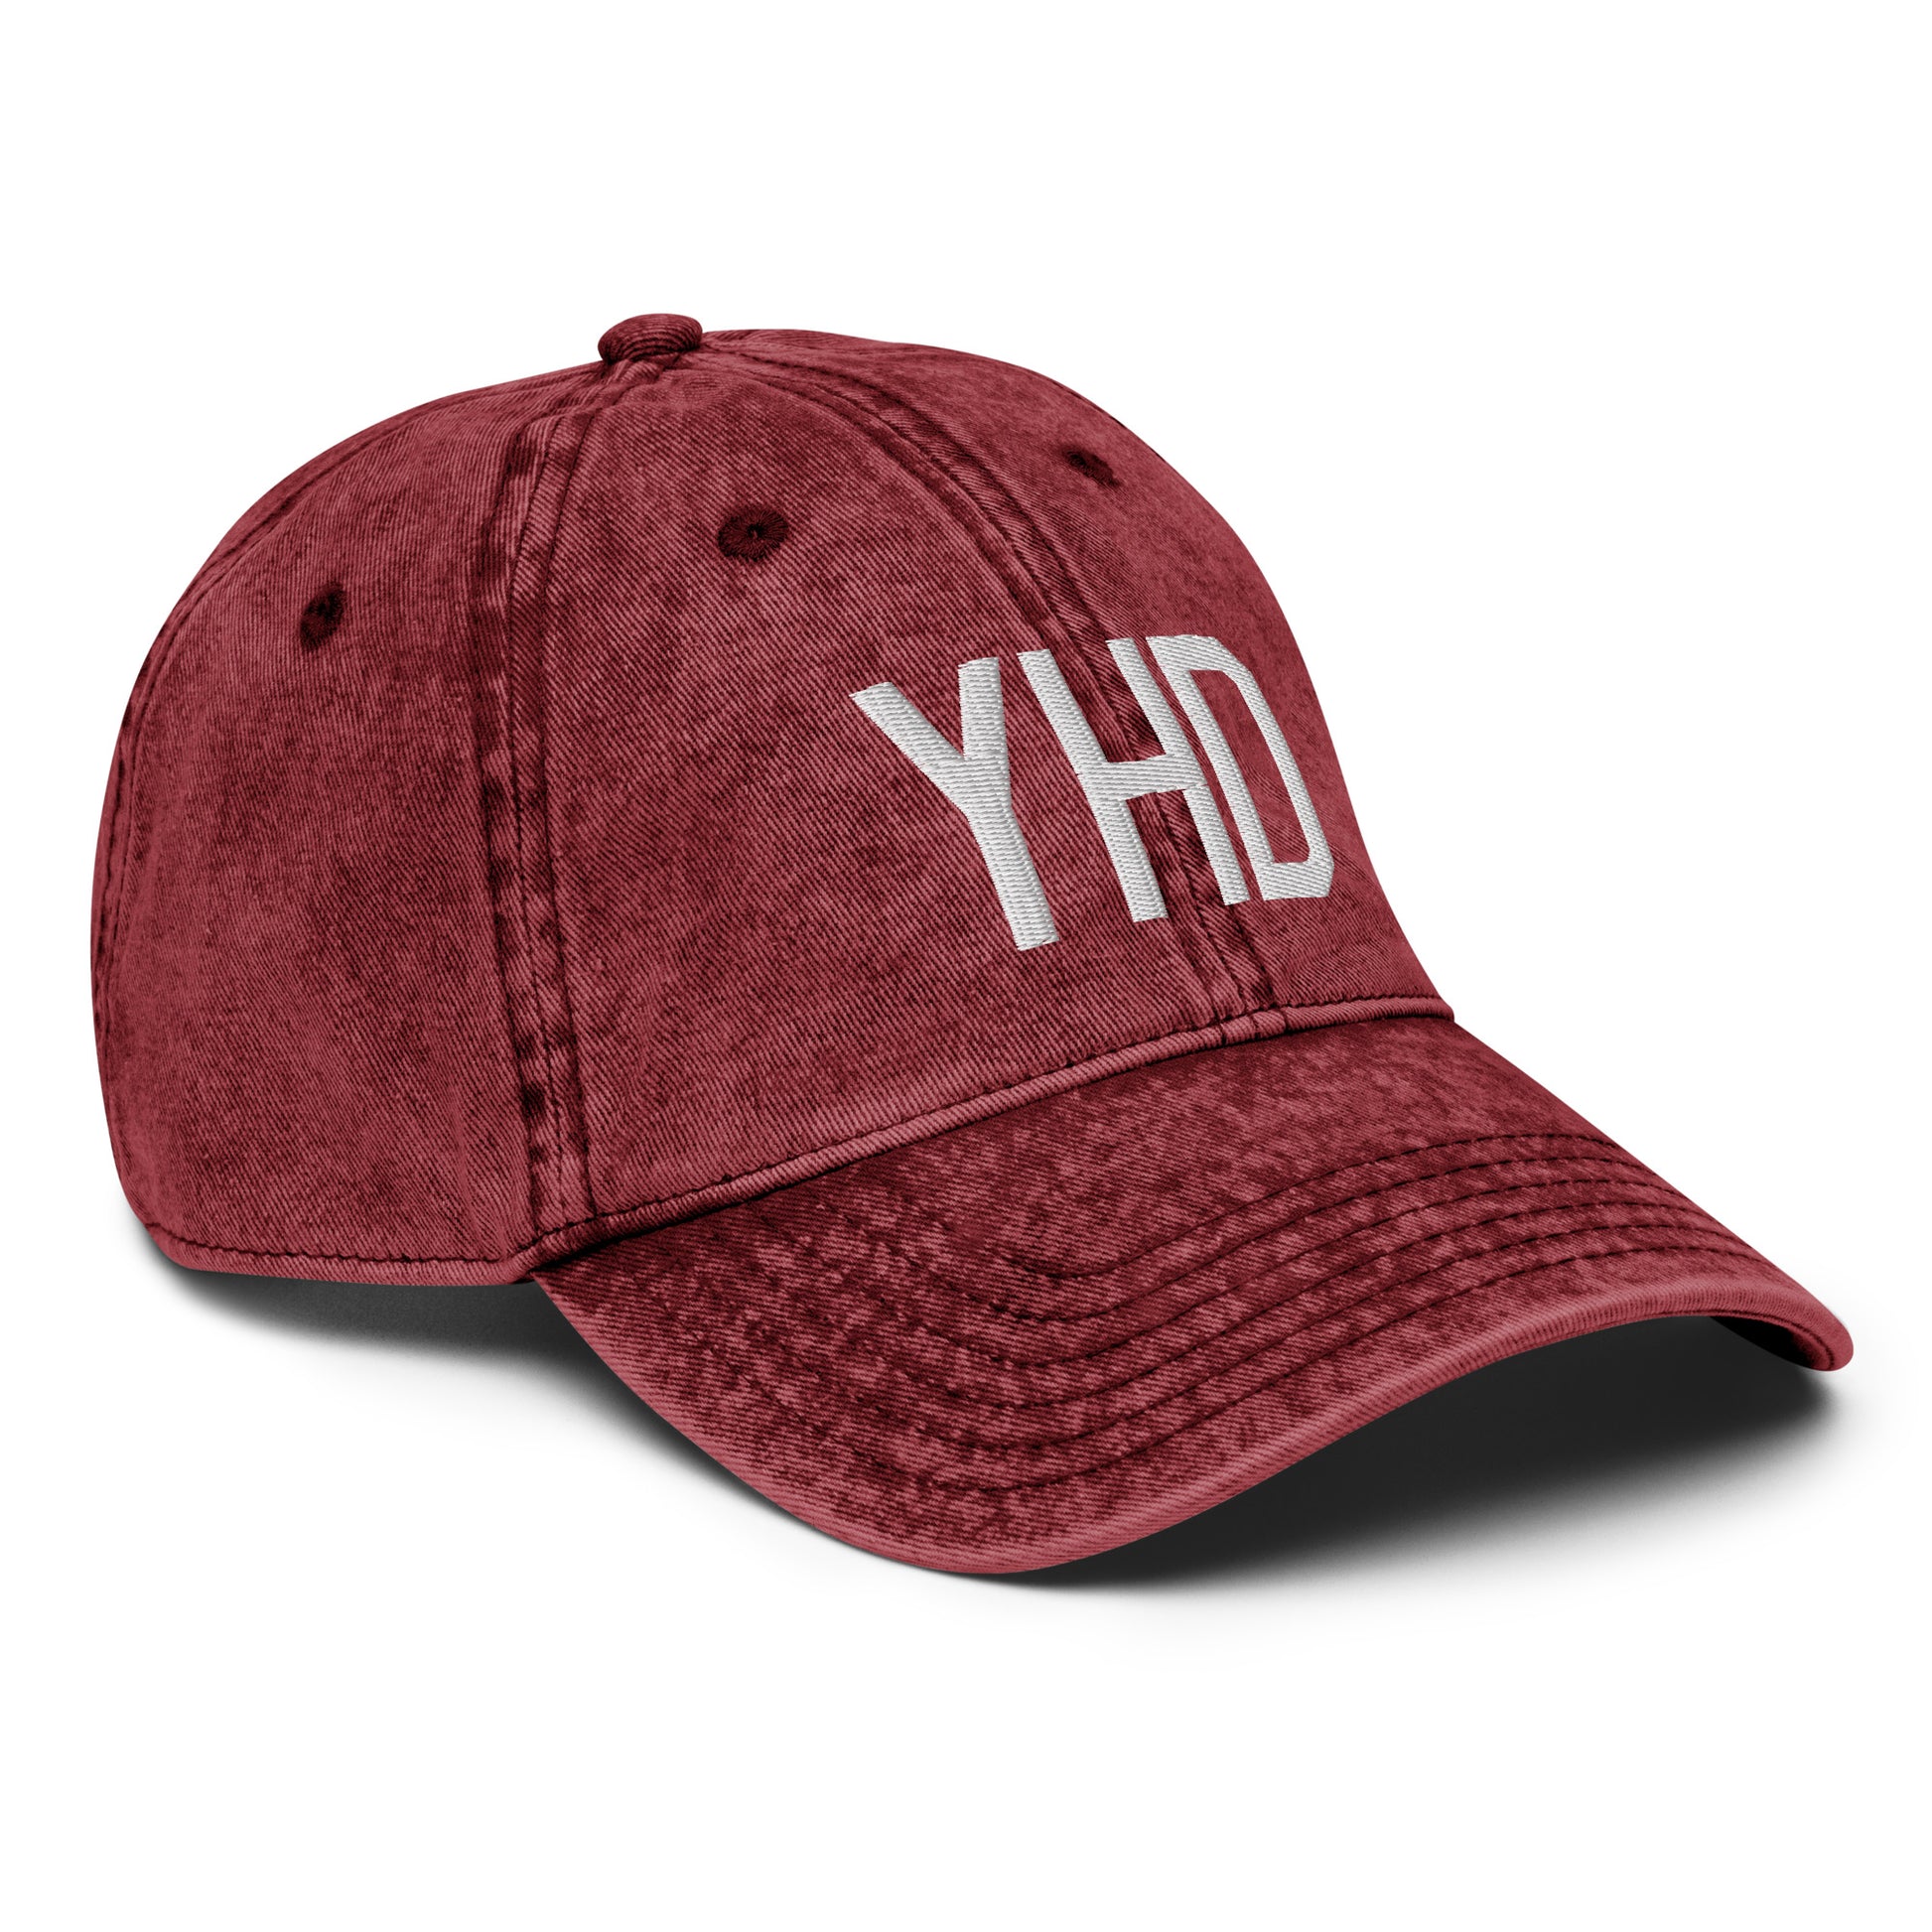 Airport Code Twill Cap - White • YHD Dryden • YHM Designs - Image 21